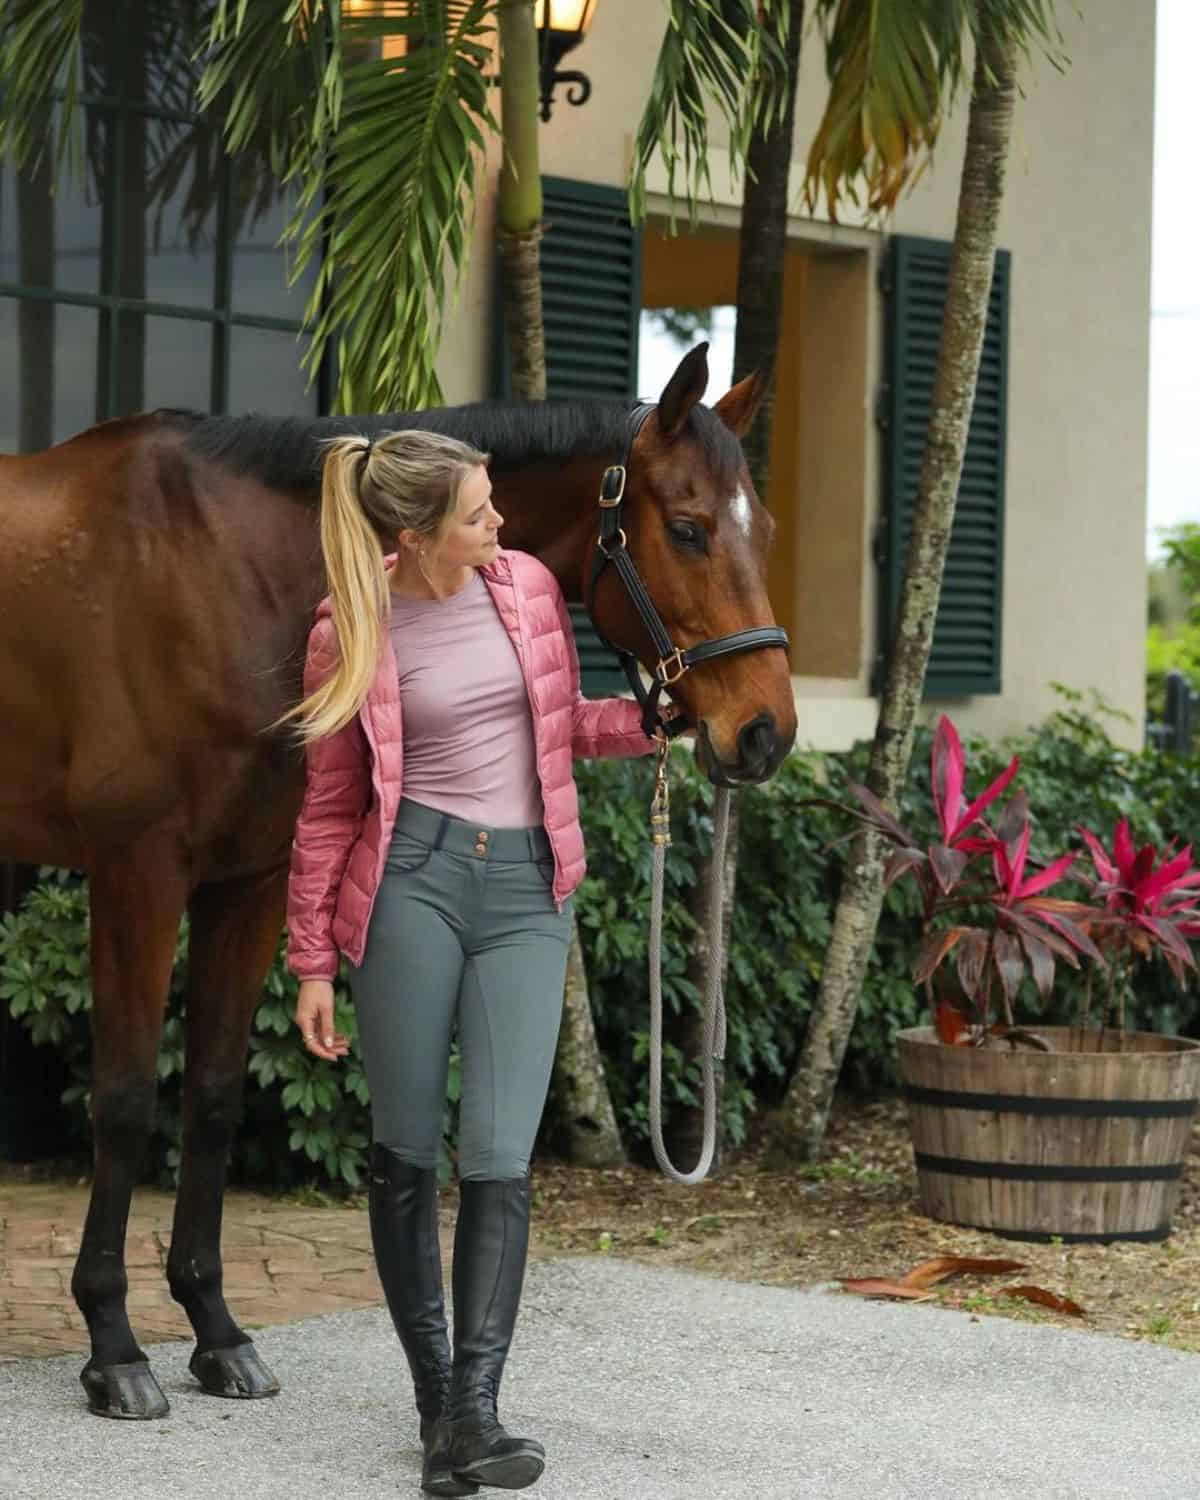 A young woman in an equestrian outfit and a pink jacket stands next to a brown horse.